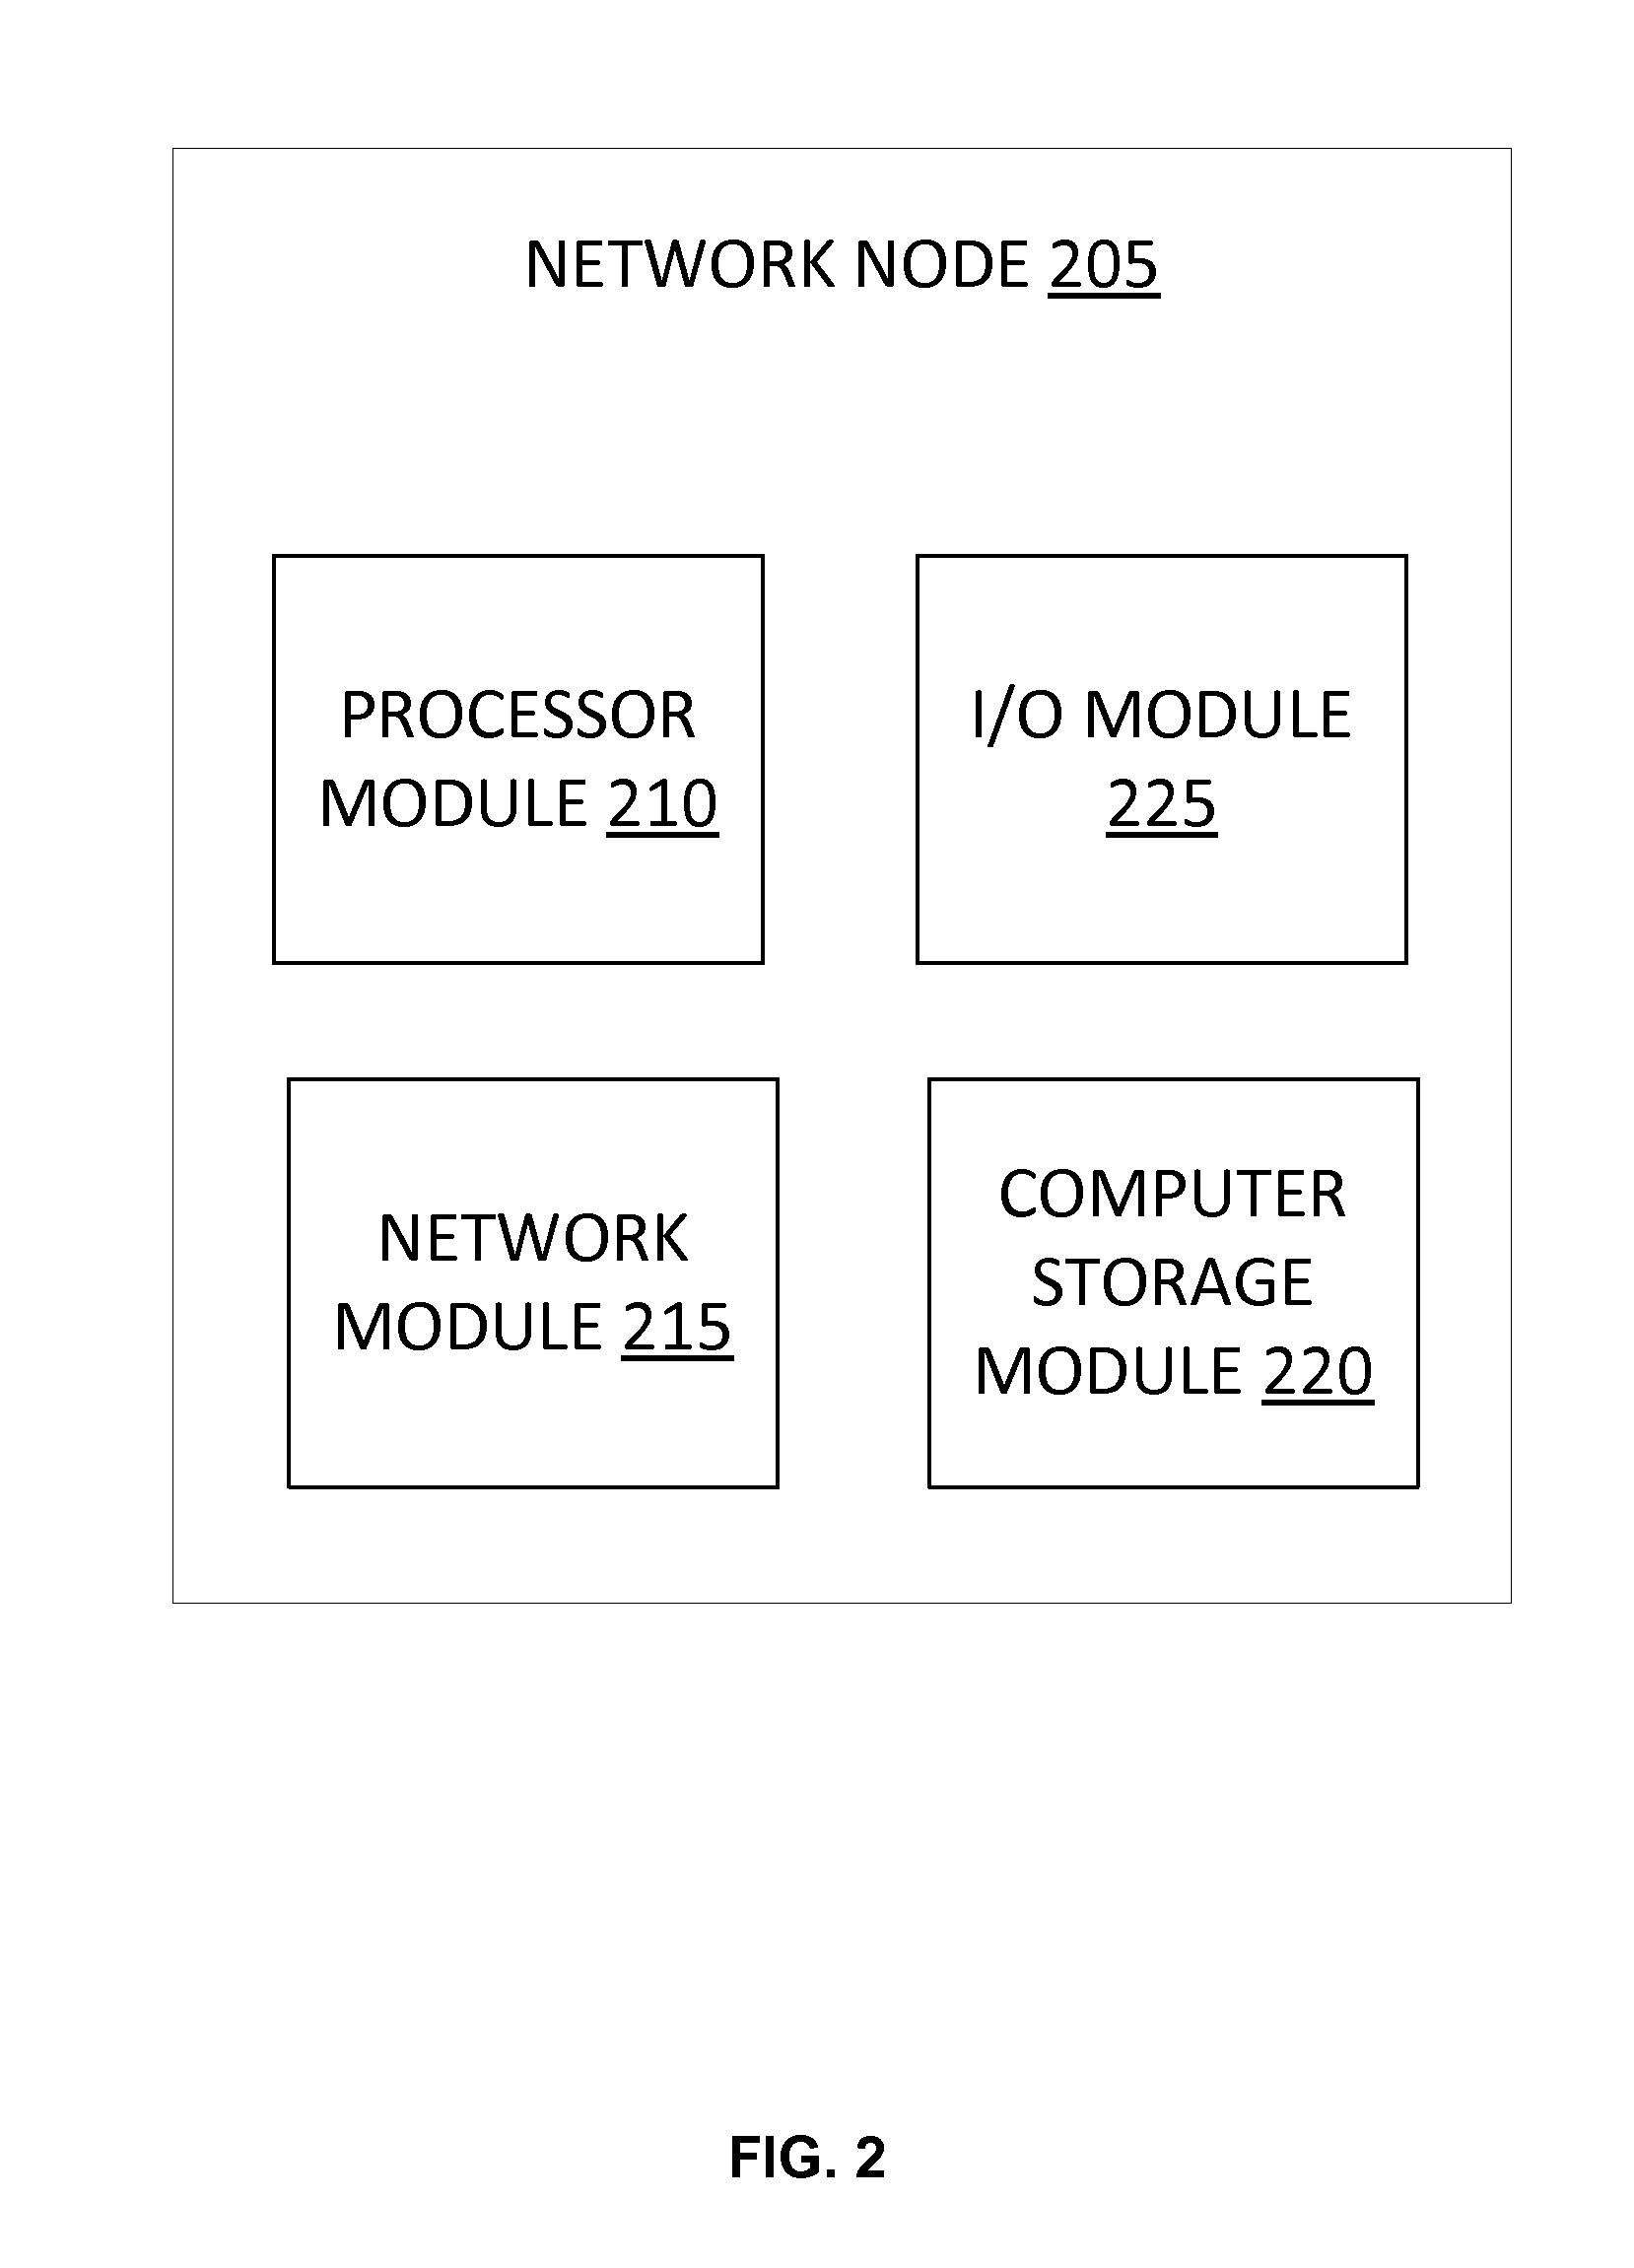 User Defined Objects for Network Devices